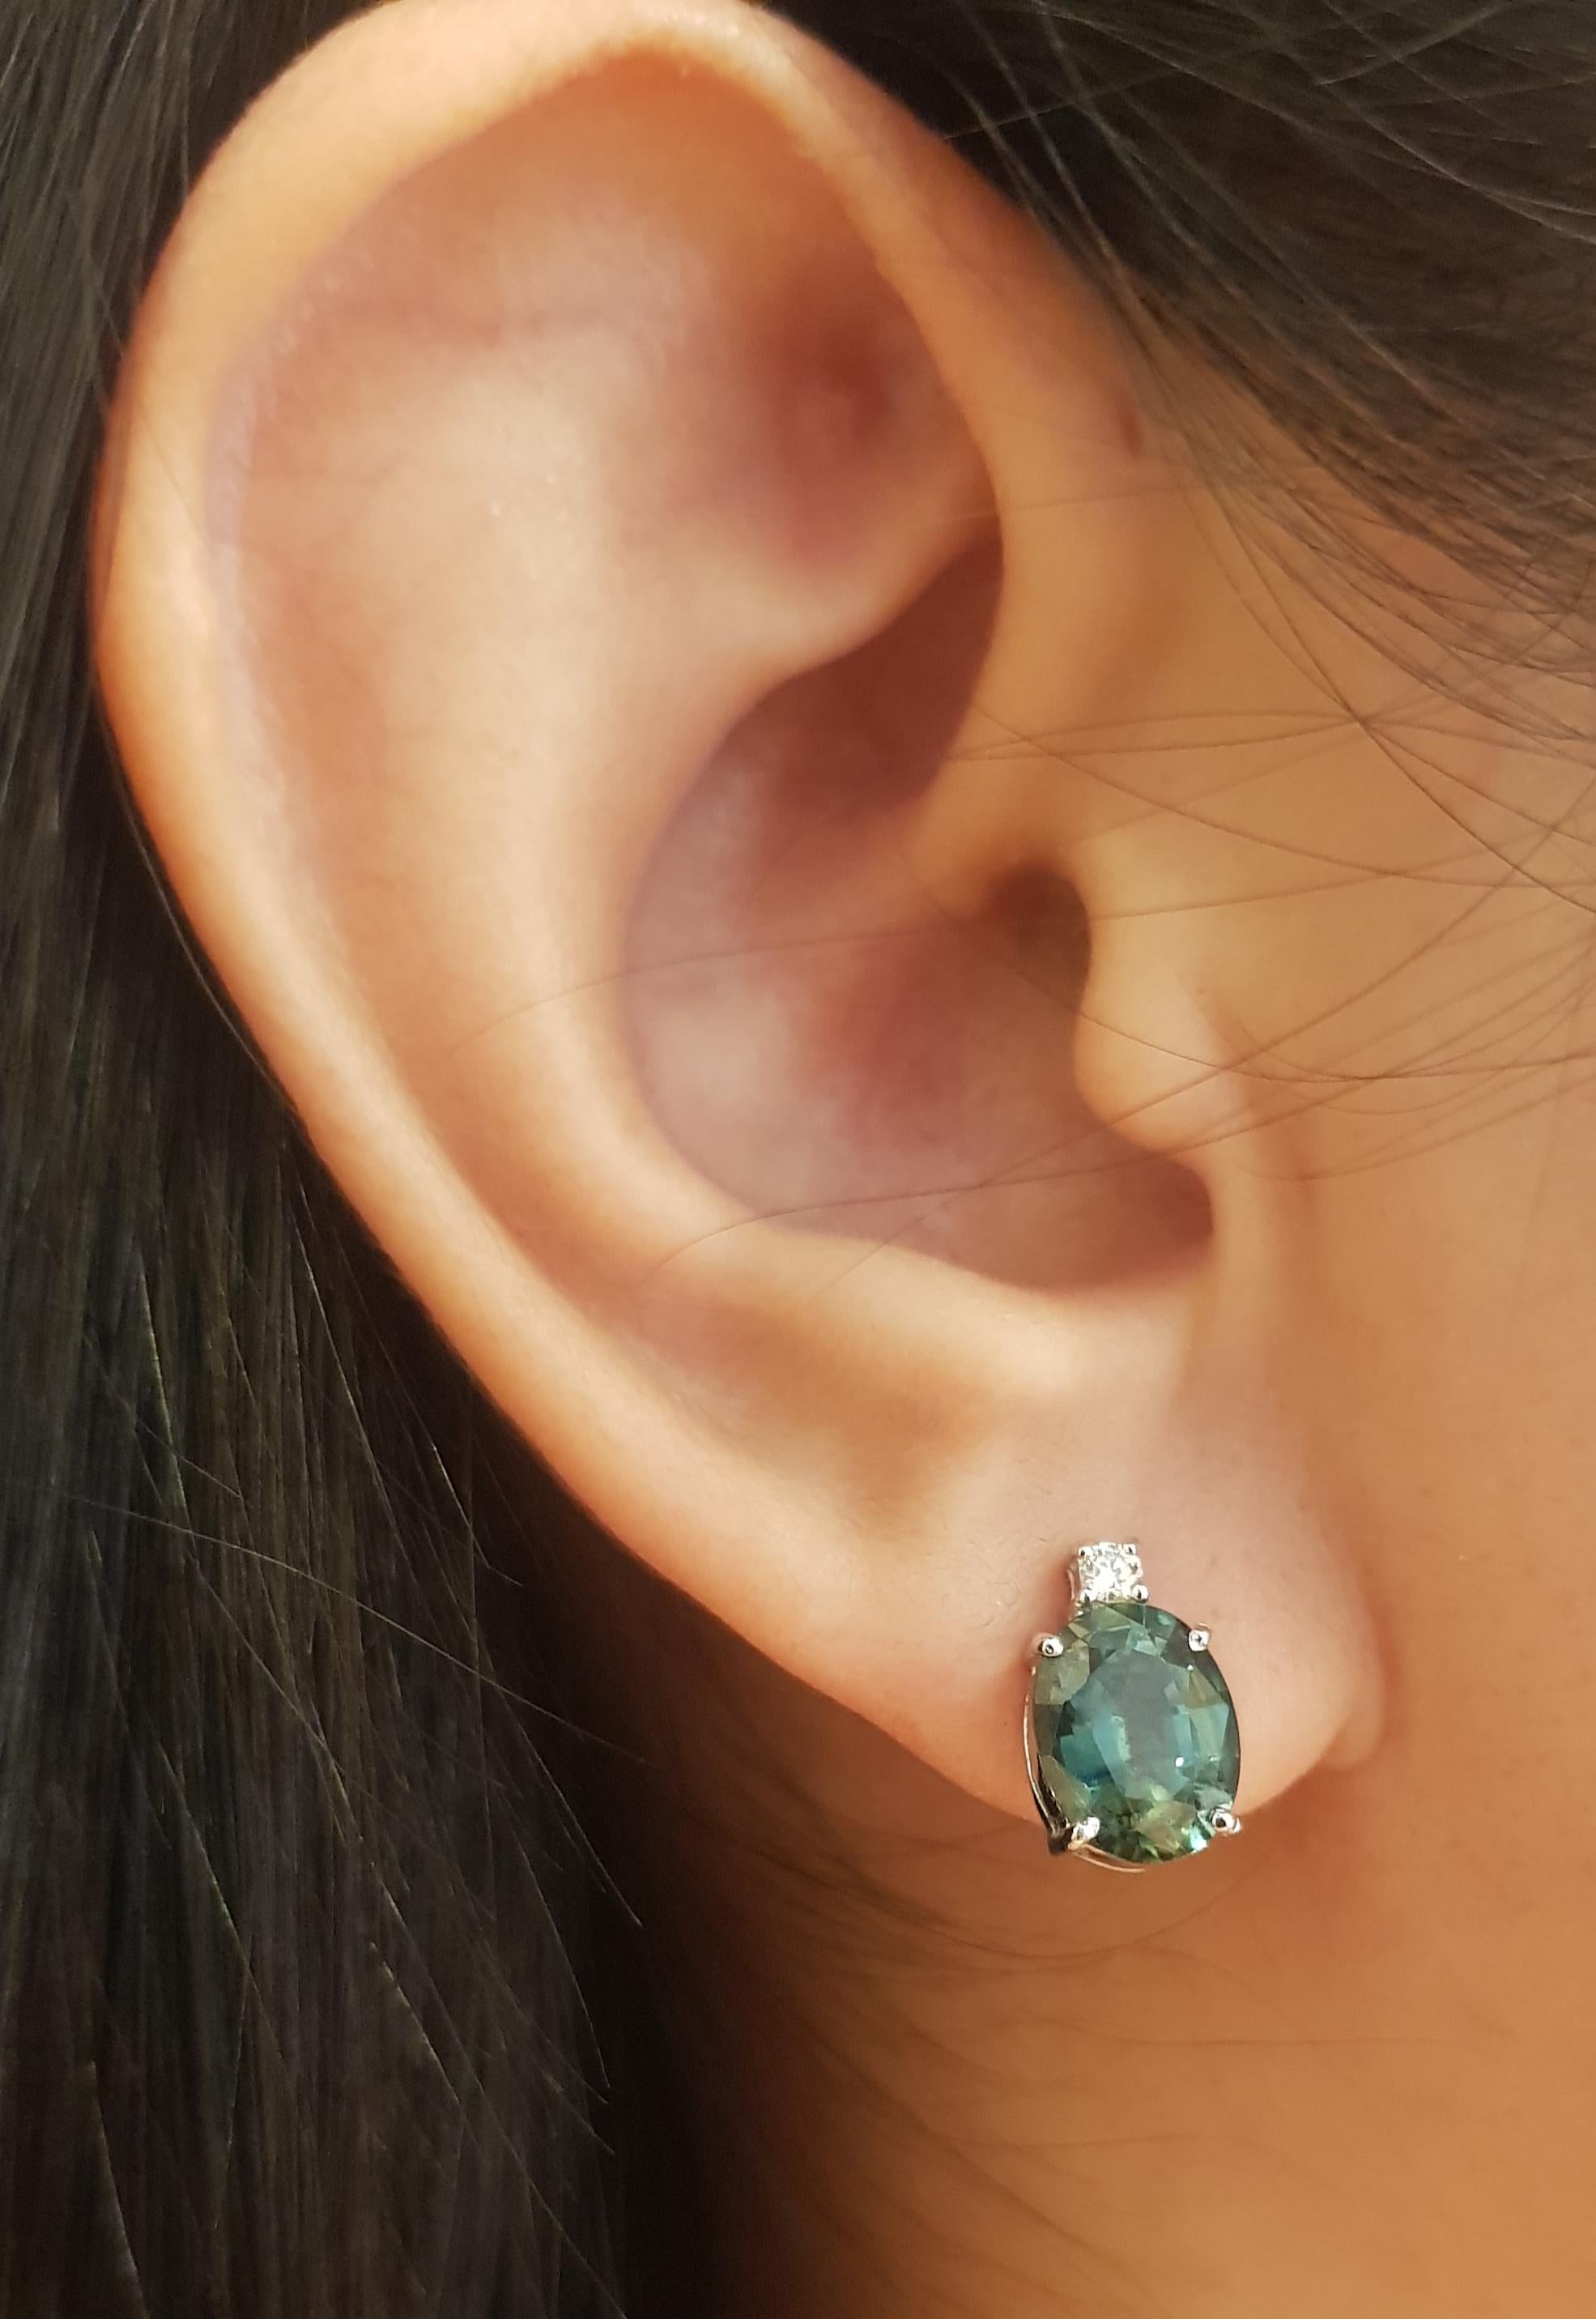 Green Sapphire 4.17 carats with Diamond 0.08 carat Earrings set in 18K White Gold Settings

Width: 0.7 cm 
Length: 1.2 cm
Total Weight: 3.92 grams

